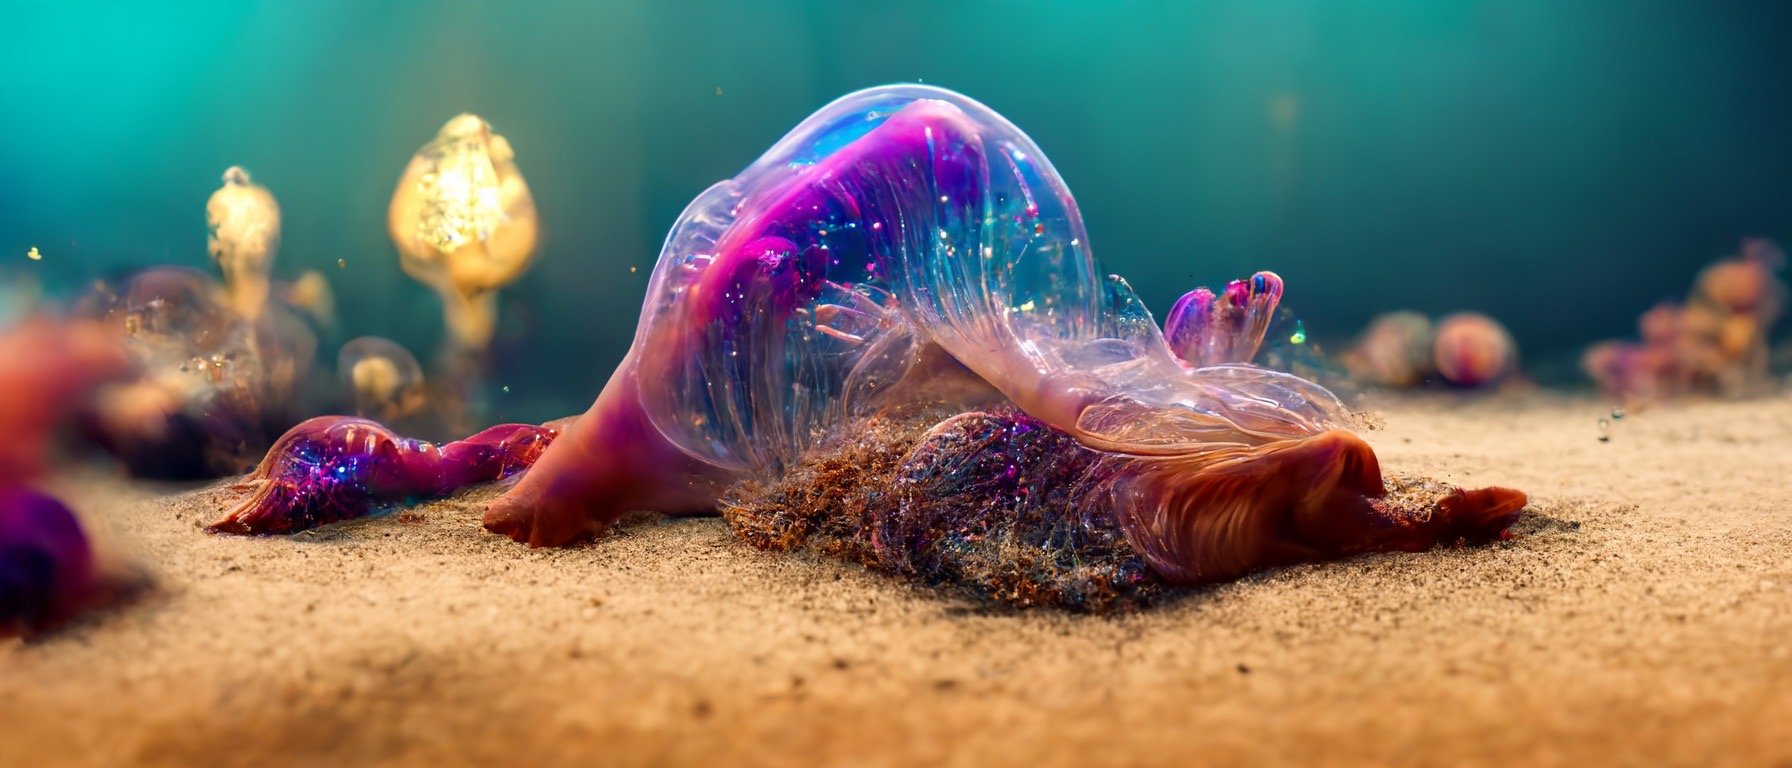 98832c6f-650f-4a40-9e23-283770fd68cb_S3RAPH_majestic_under_see_glowing_jelly_fish_1_prominent_beautiful_mermaid_tail._Seaweed_and_coral_backgrou.JPG